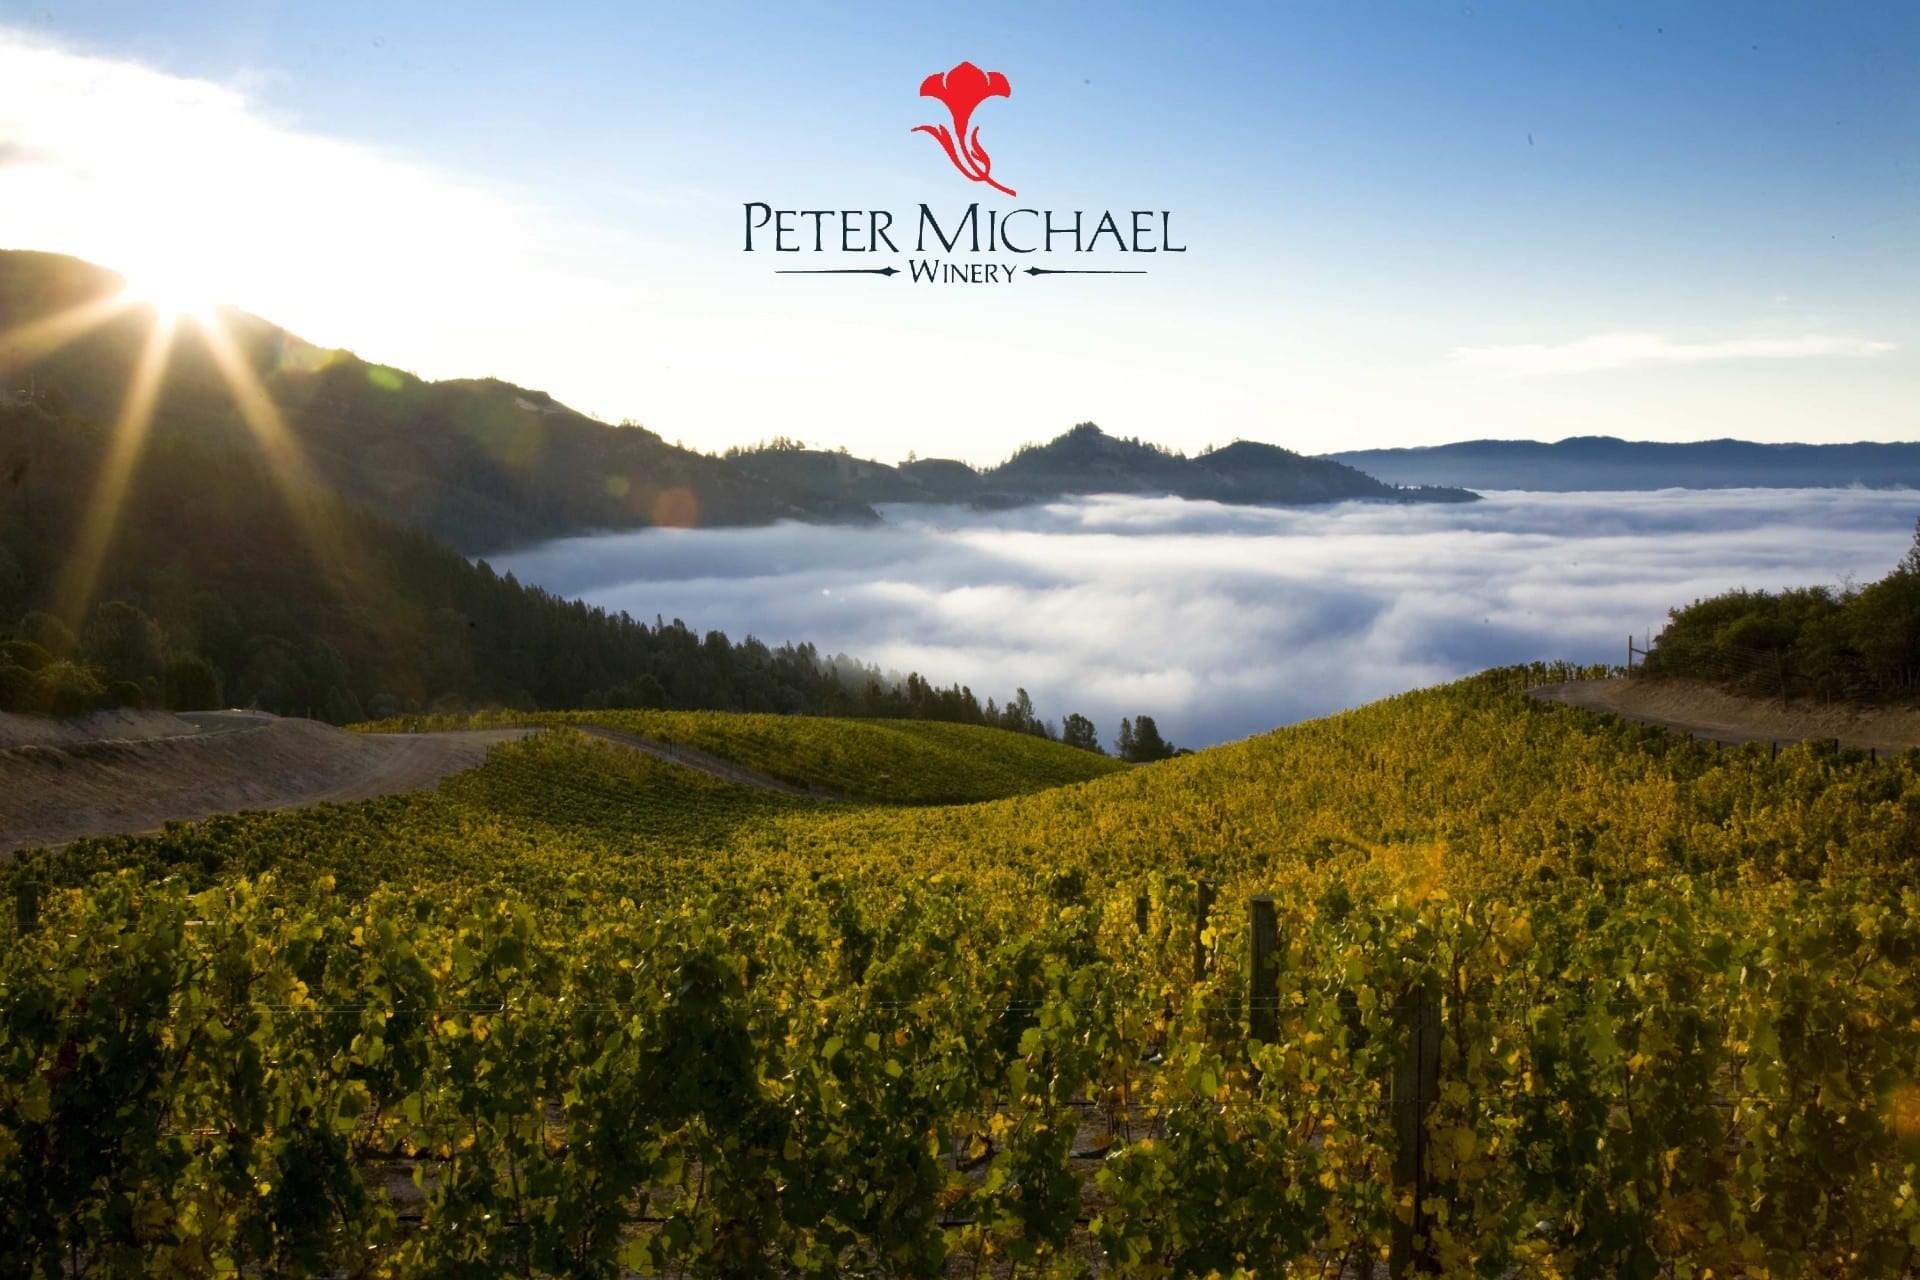 The Mountain Vineyards of Peter Michael Winery - 67 Pall Mall